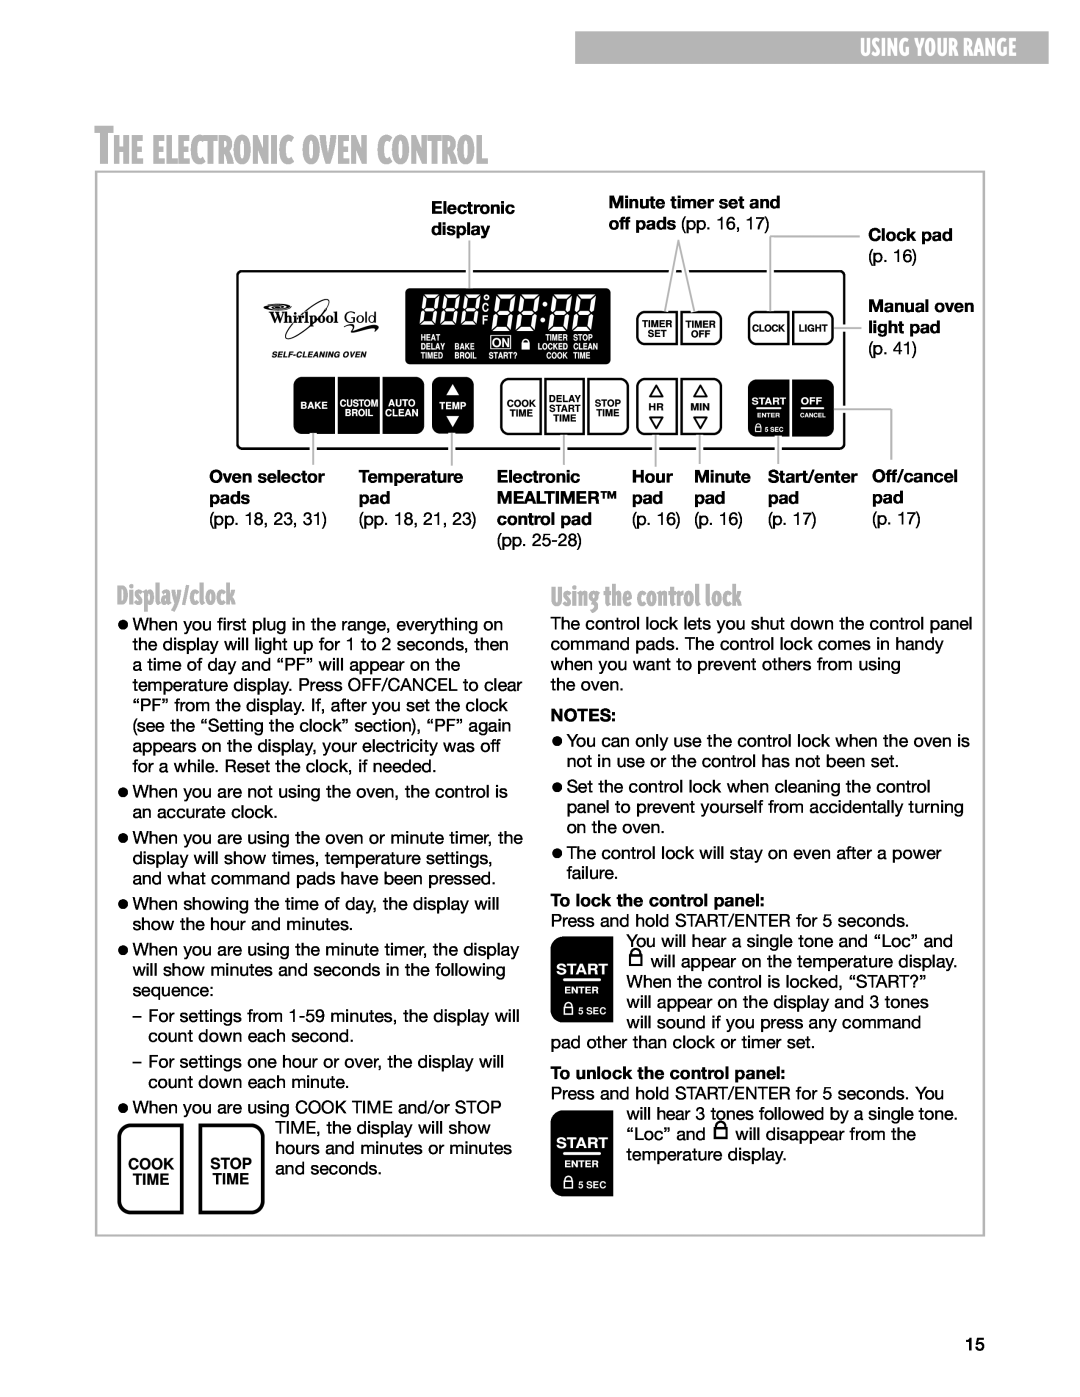 Whirlpool GR399LXG The Electronic Oven Control, Display/clock, Using the control lock, Using Your Range, off pads pp. 16 